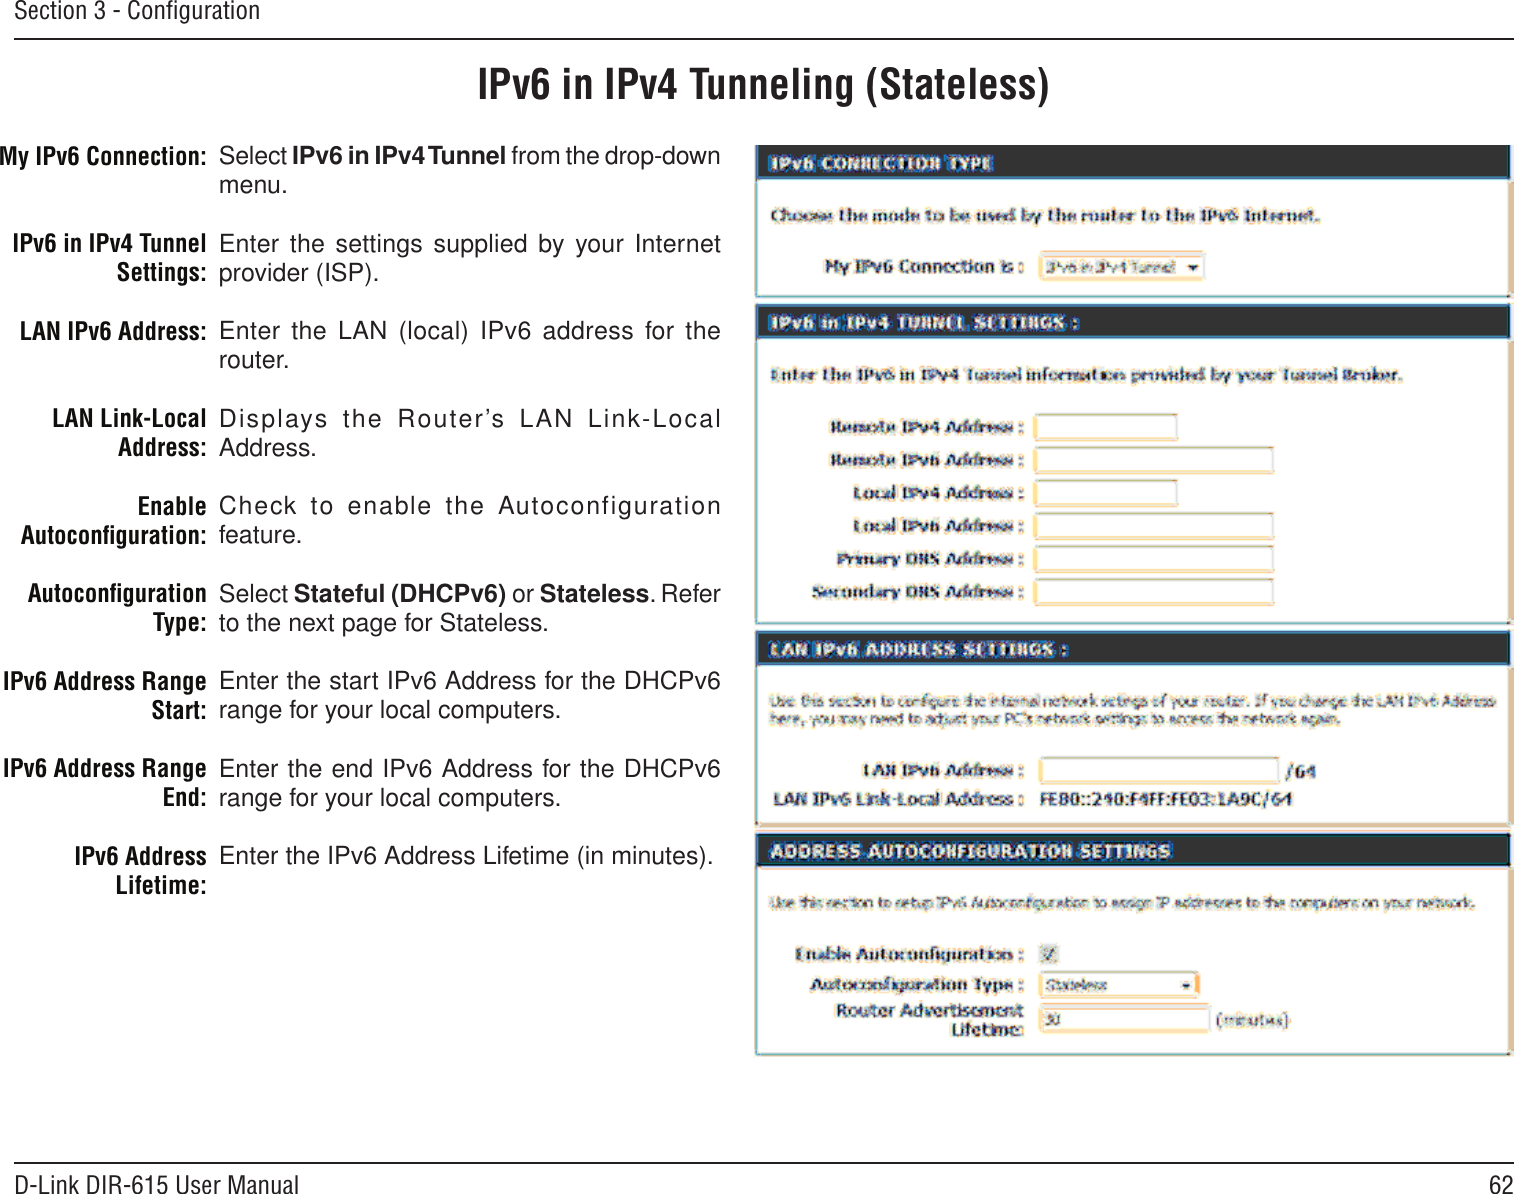 62D-Link DIR-615 User ManualSection 3 - ConﬁgurationIPv6 in IPv4 Tunneling (Stateless)Select IPv6 in IPv4 Tunnel from the drop-down menu.Enter the settings supplied by your Internet provider (ISP). Enter  the  LAN  (local)  IPv6  address  for  the router. Displays  the  Router’s  LAN  Link-Local Address.Check to enable the Autoconfiguration feature.Select Stateful (DHCPv6) or Stateless. Refer to the next page for Stateless.Enter the start IPv6 Address for the DHCPv6 range for your local computers.Enter the end IPv6 Address for the DHCPv6 range for your local computers.Enter the IPv6 Address Lifetime (in minutes).My IPv6 Connection:IPv6 in IPv4 Tunnel Settings:LAN IPv6 Address:LAN Link-Local Address:Enable Autoconﬁguration:Autoconﬁguration Type:IPv6 Address Range Start:IPv6 Address Range End:IPv6 Address Lifetime: